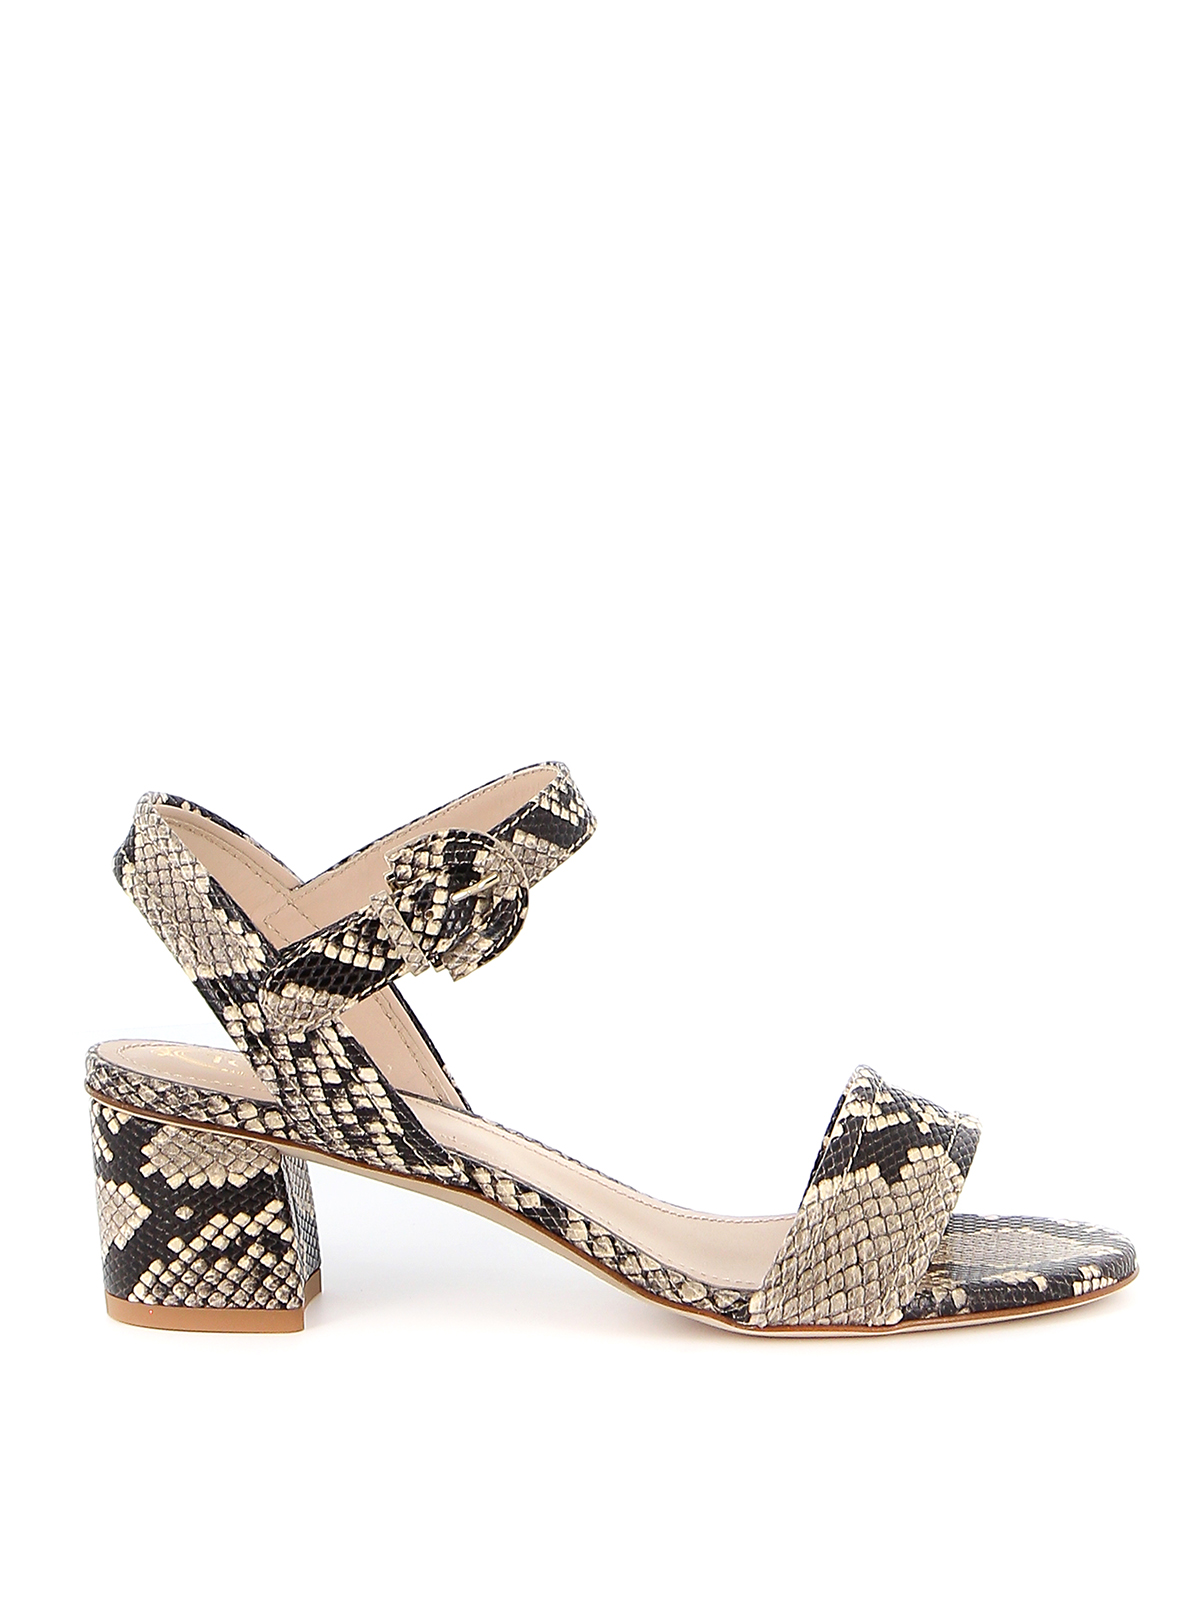 TOD'S REPTILE PRINT LEATHER SANDALS